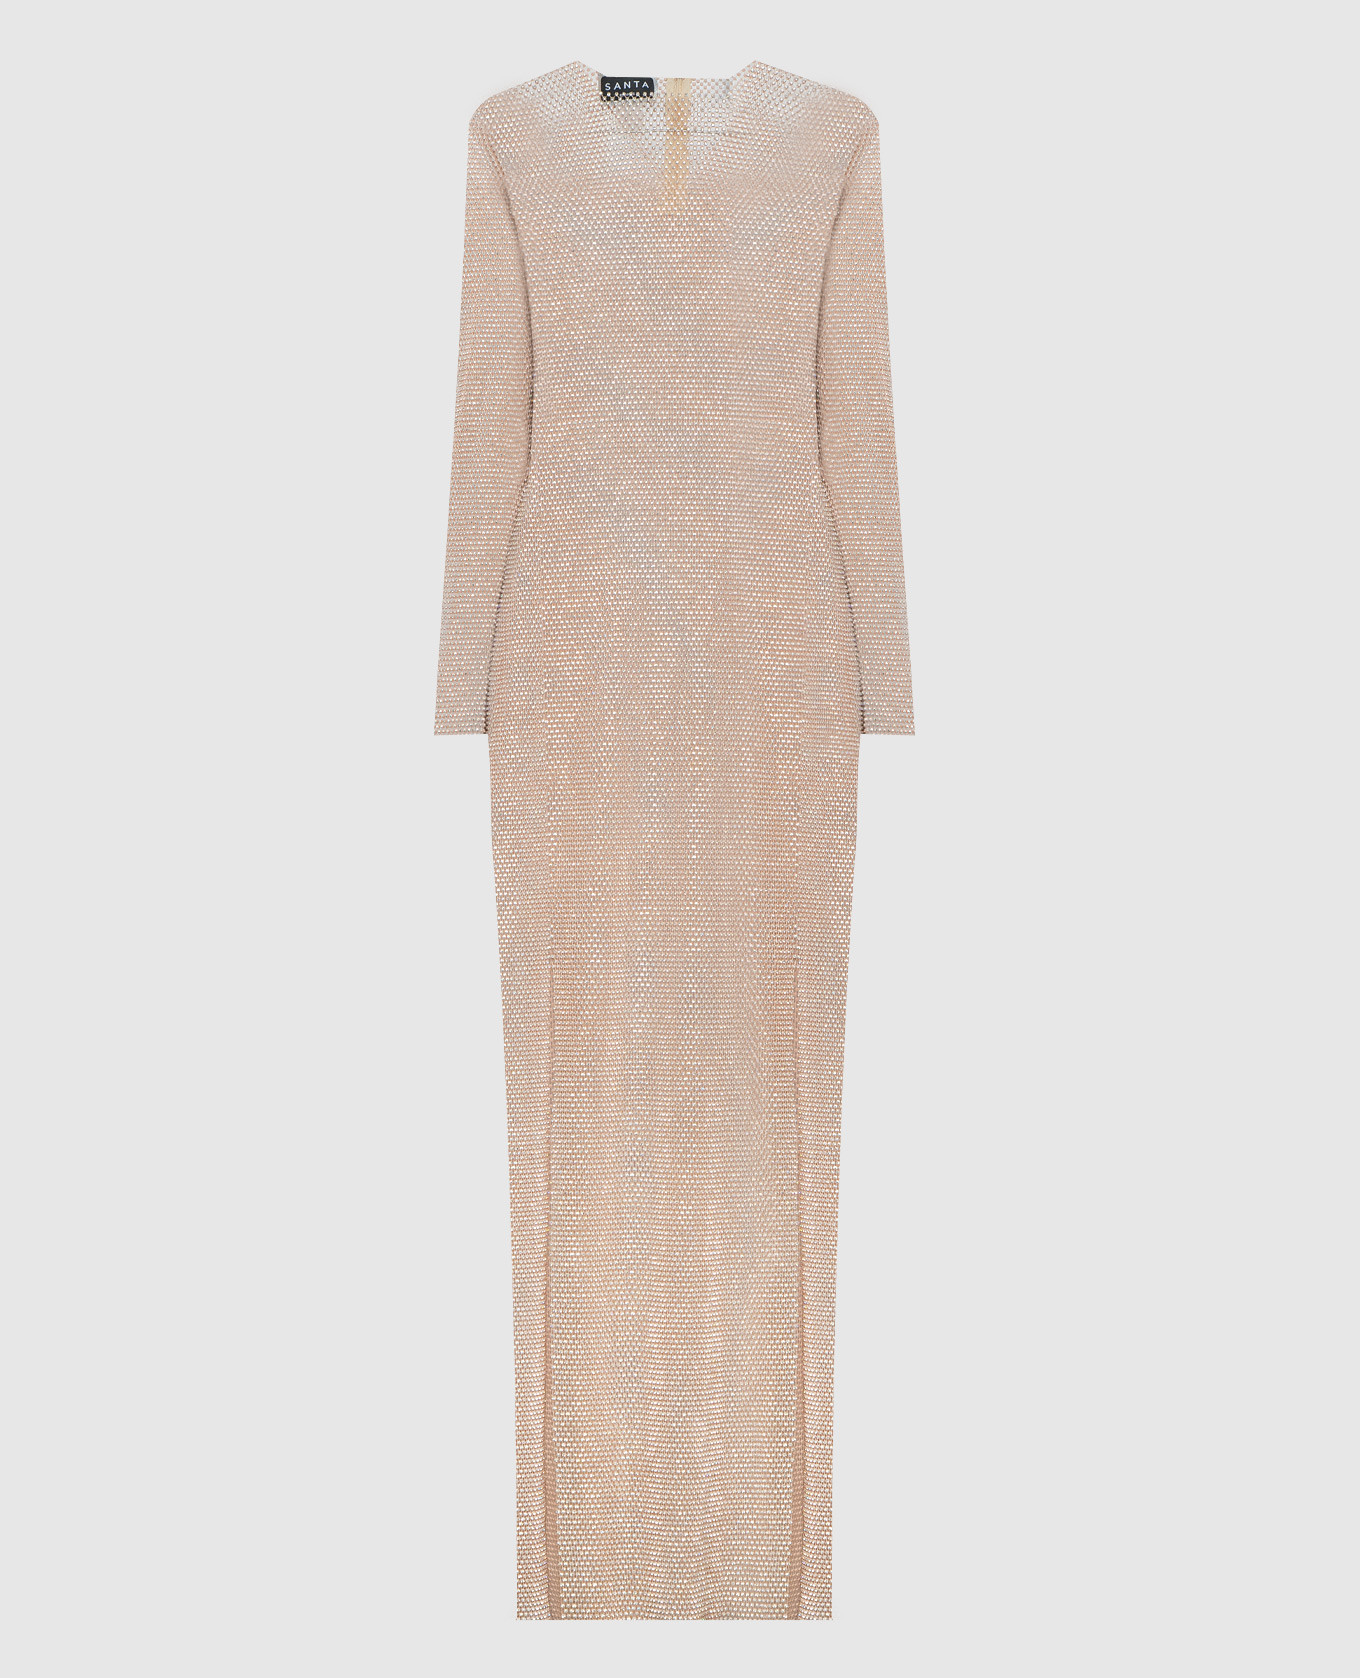 Beige maxi dress with crystals and slits